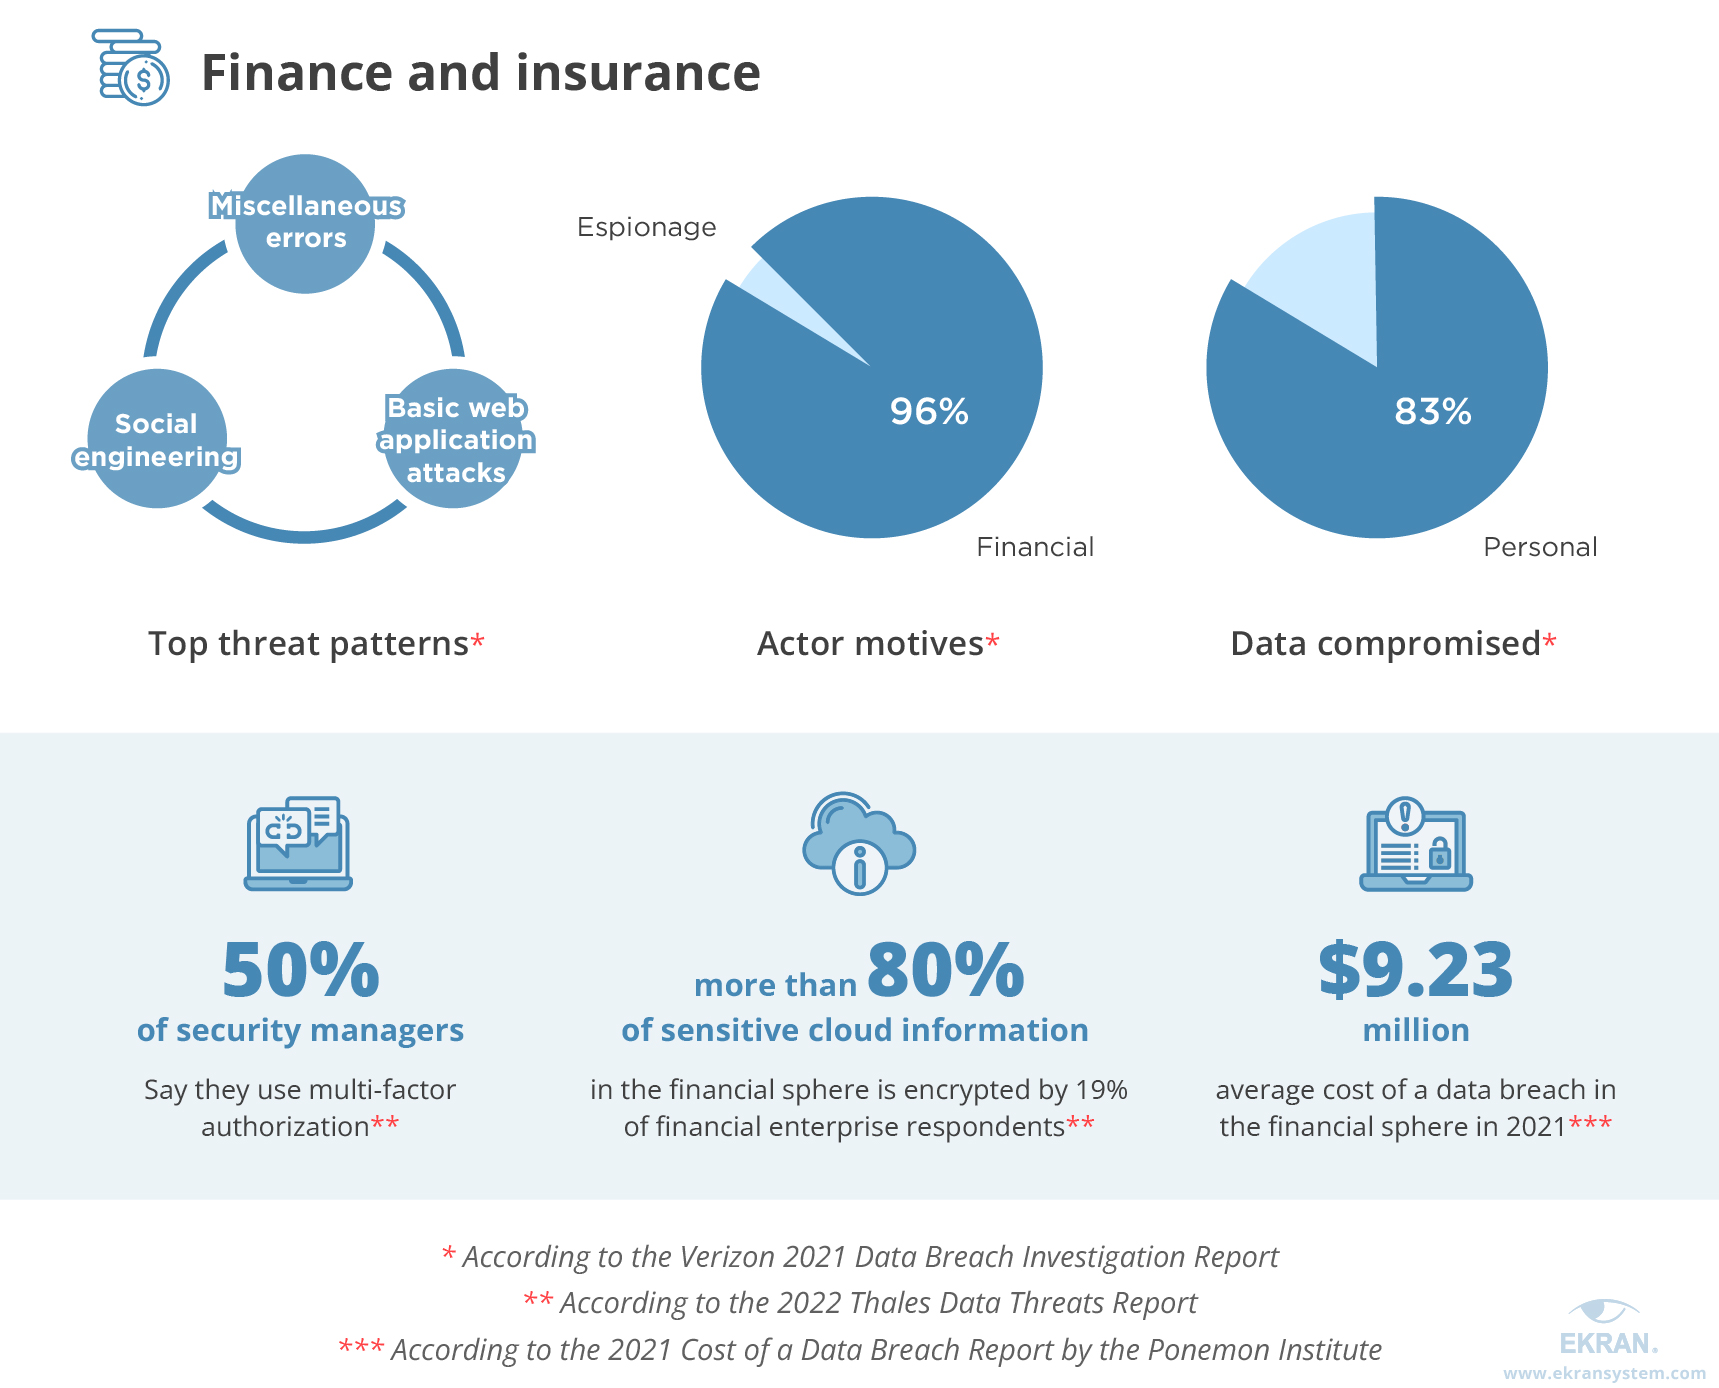 Cyberthreats in the finance and insurance industry